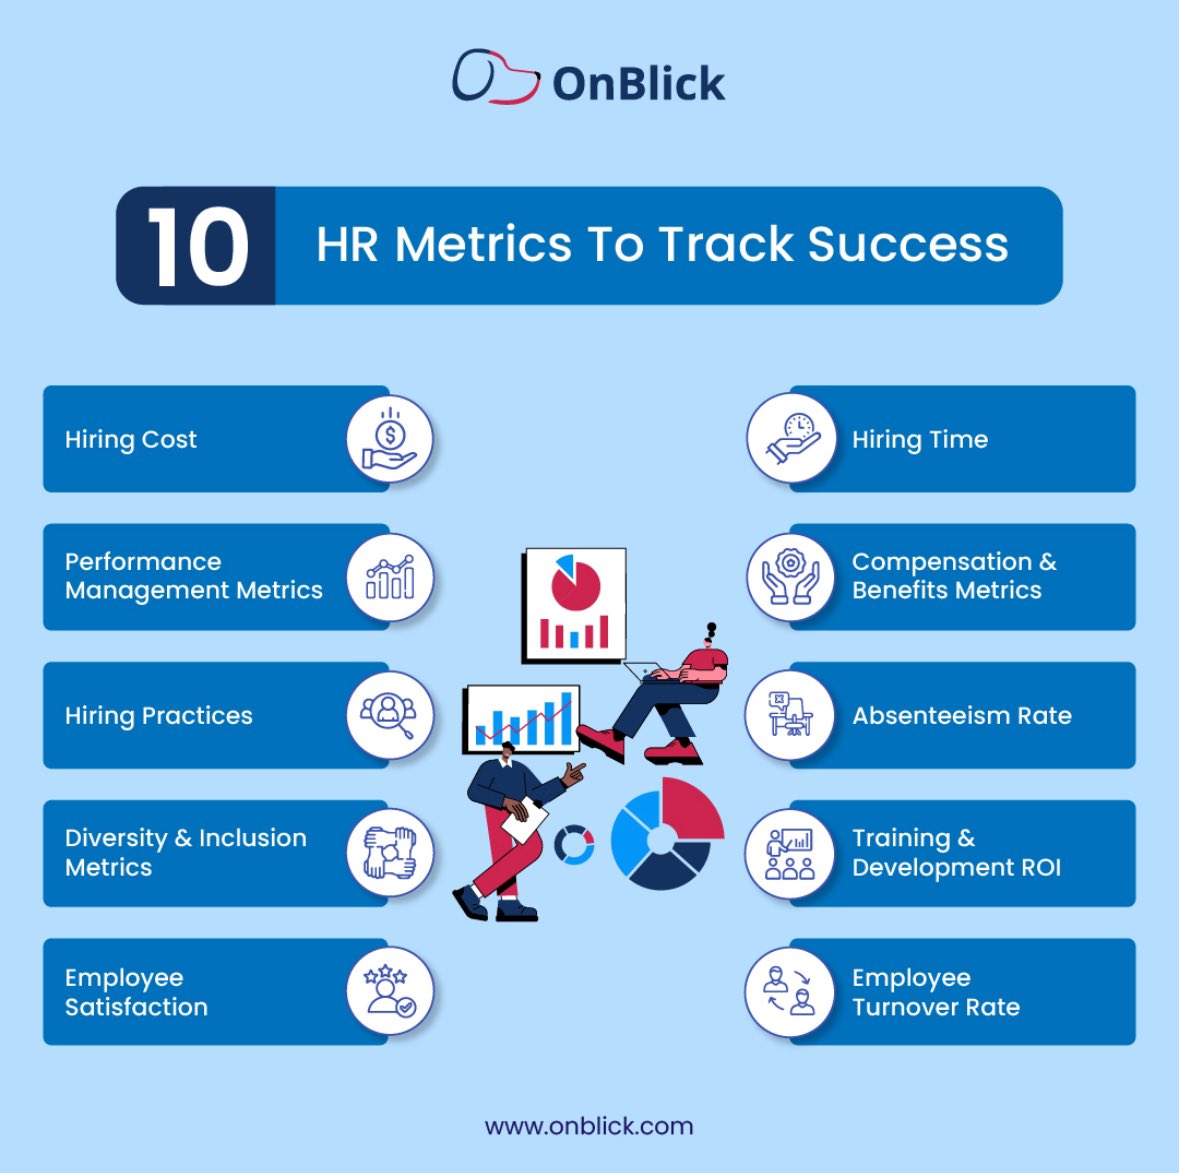 Here are 10 HR metrics you should be tracking to measure how successful you
are driving the HR operations at your organization.

#onblick #humanresources #hr #hrmetrics #metrics #hroperations